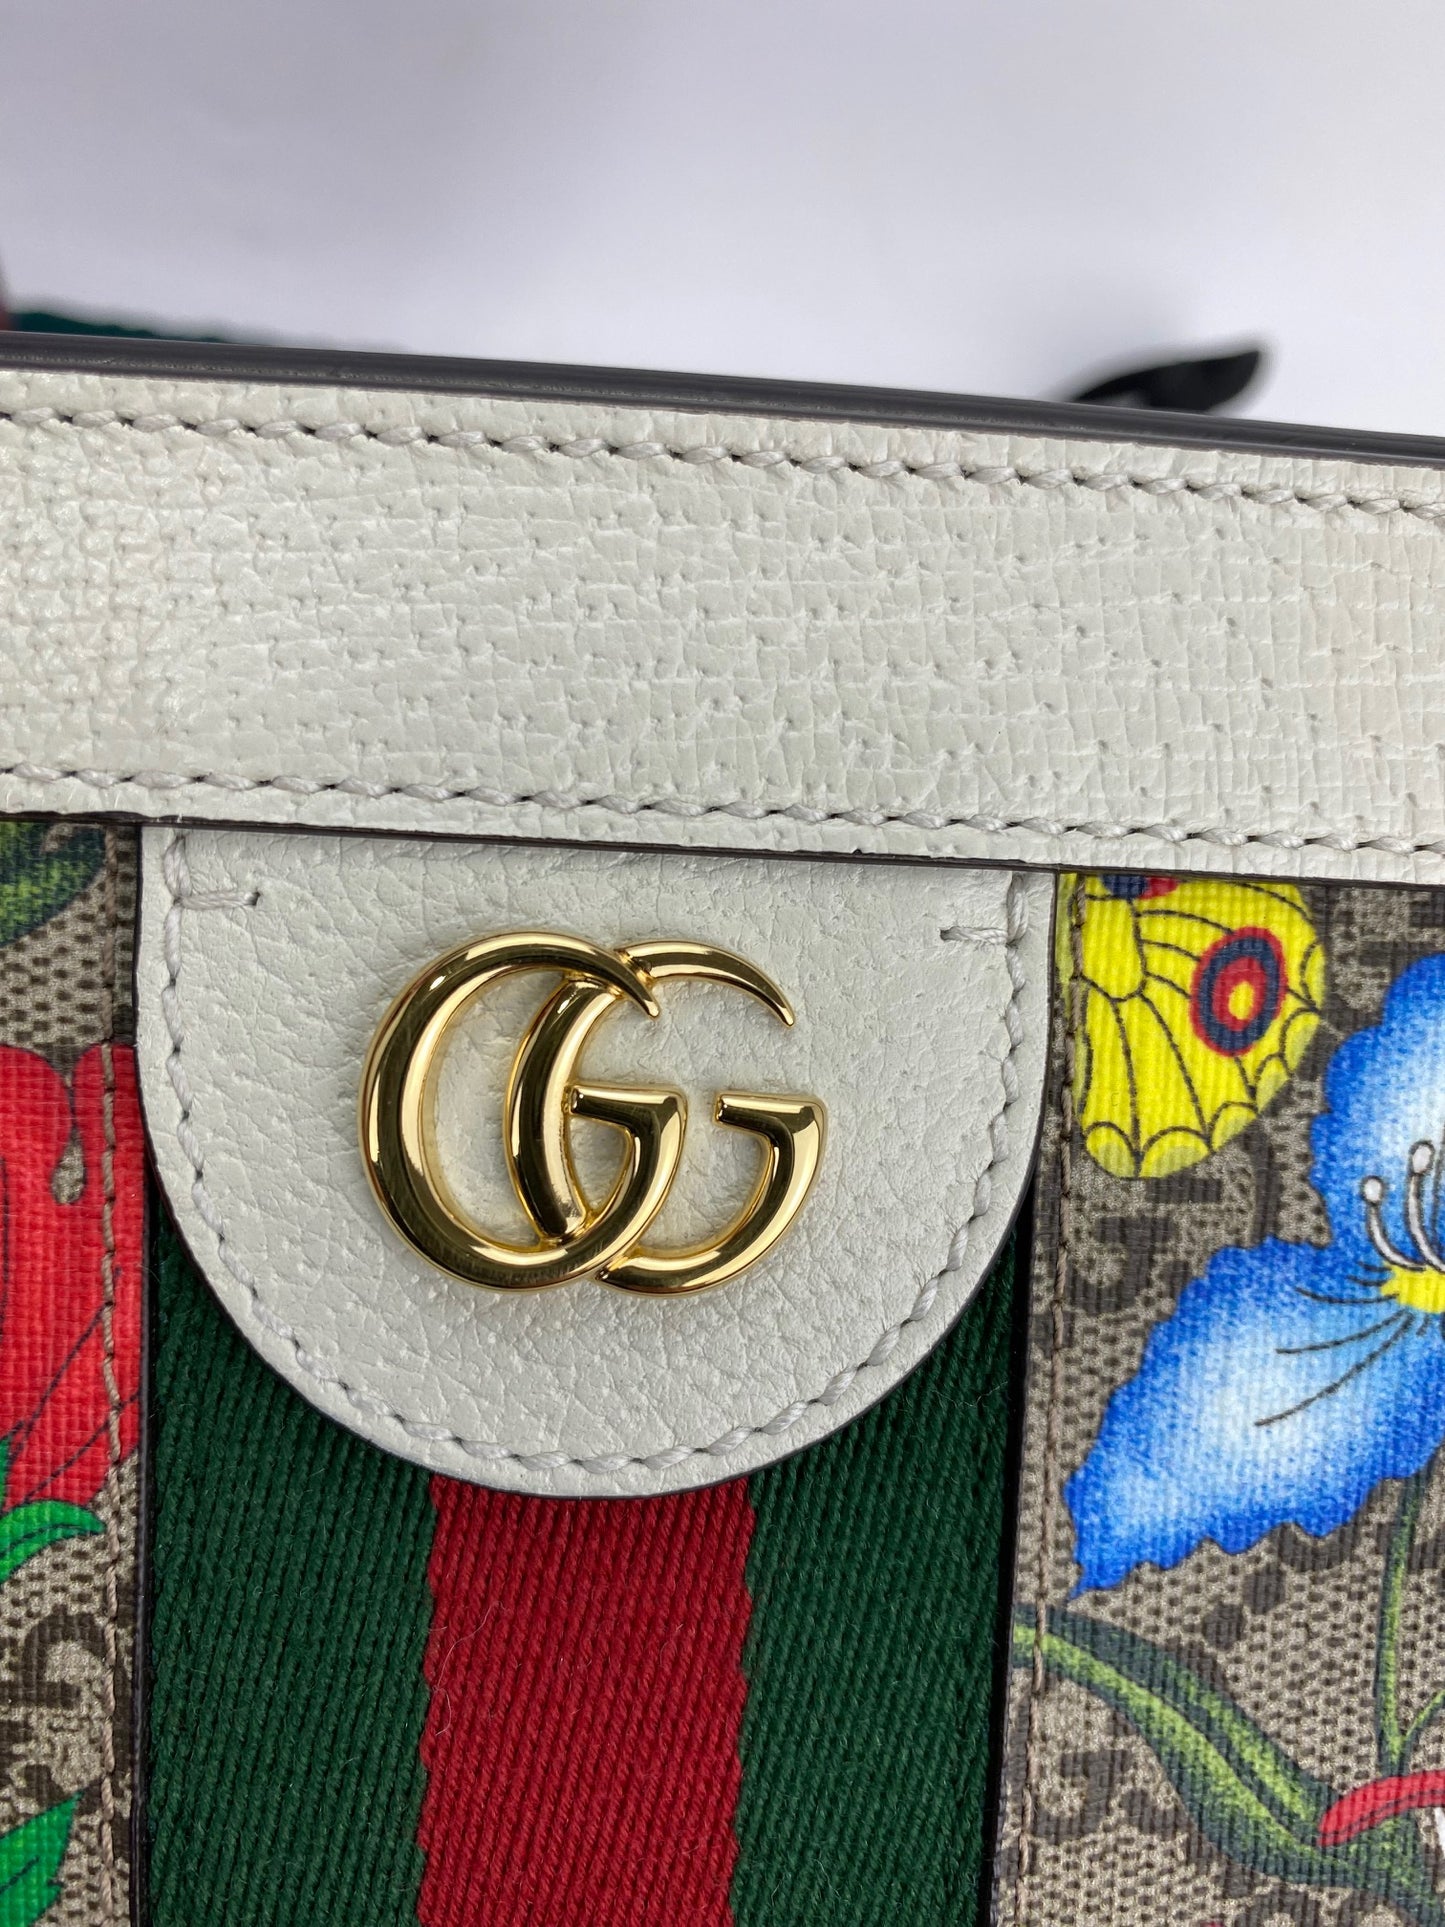 Ophidia GG small messenger bag in beige and blue GG Supreme